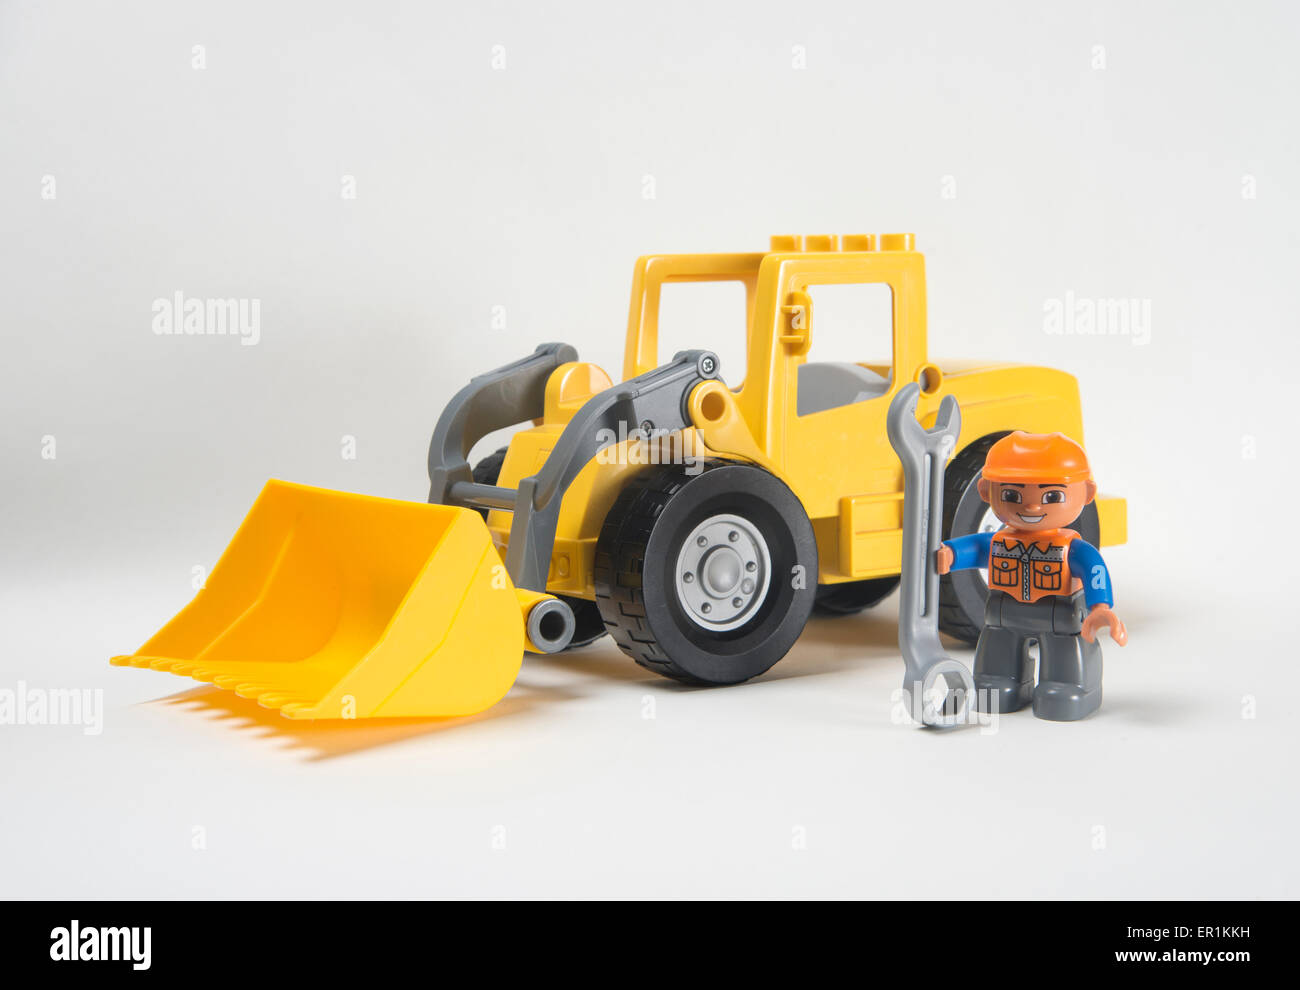 Man at work. Lego Duplo front loader digger with driver holding spanner  Stock Photo - Alamy